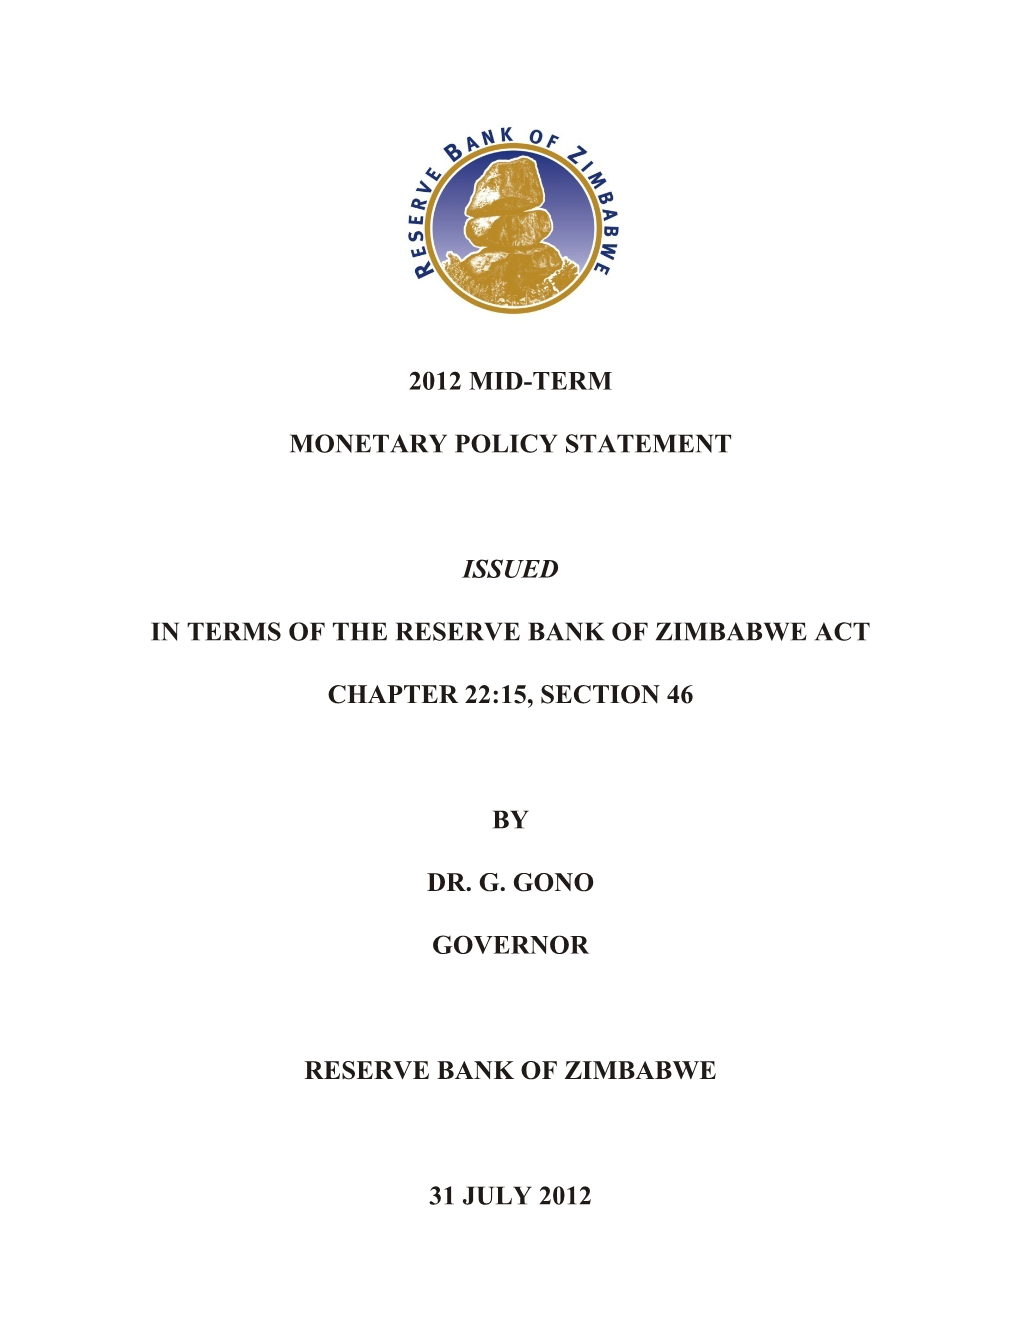 2012 Mid-Term Monetary Policy Statement Issued in Terms